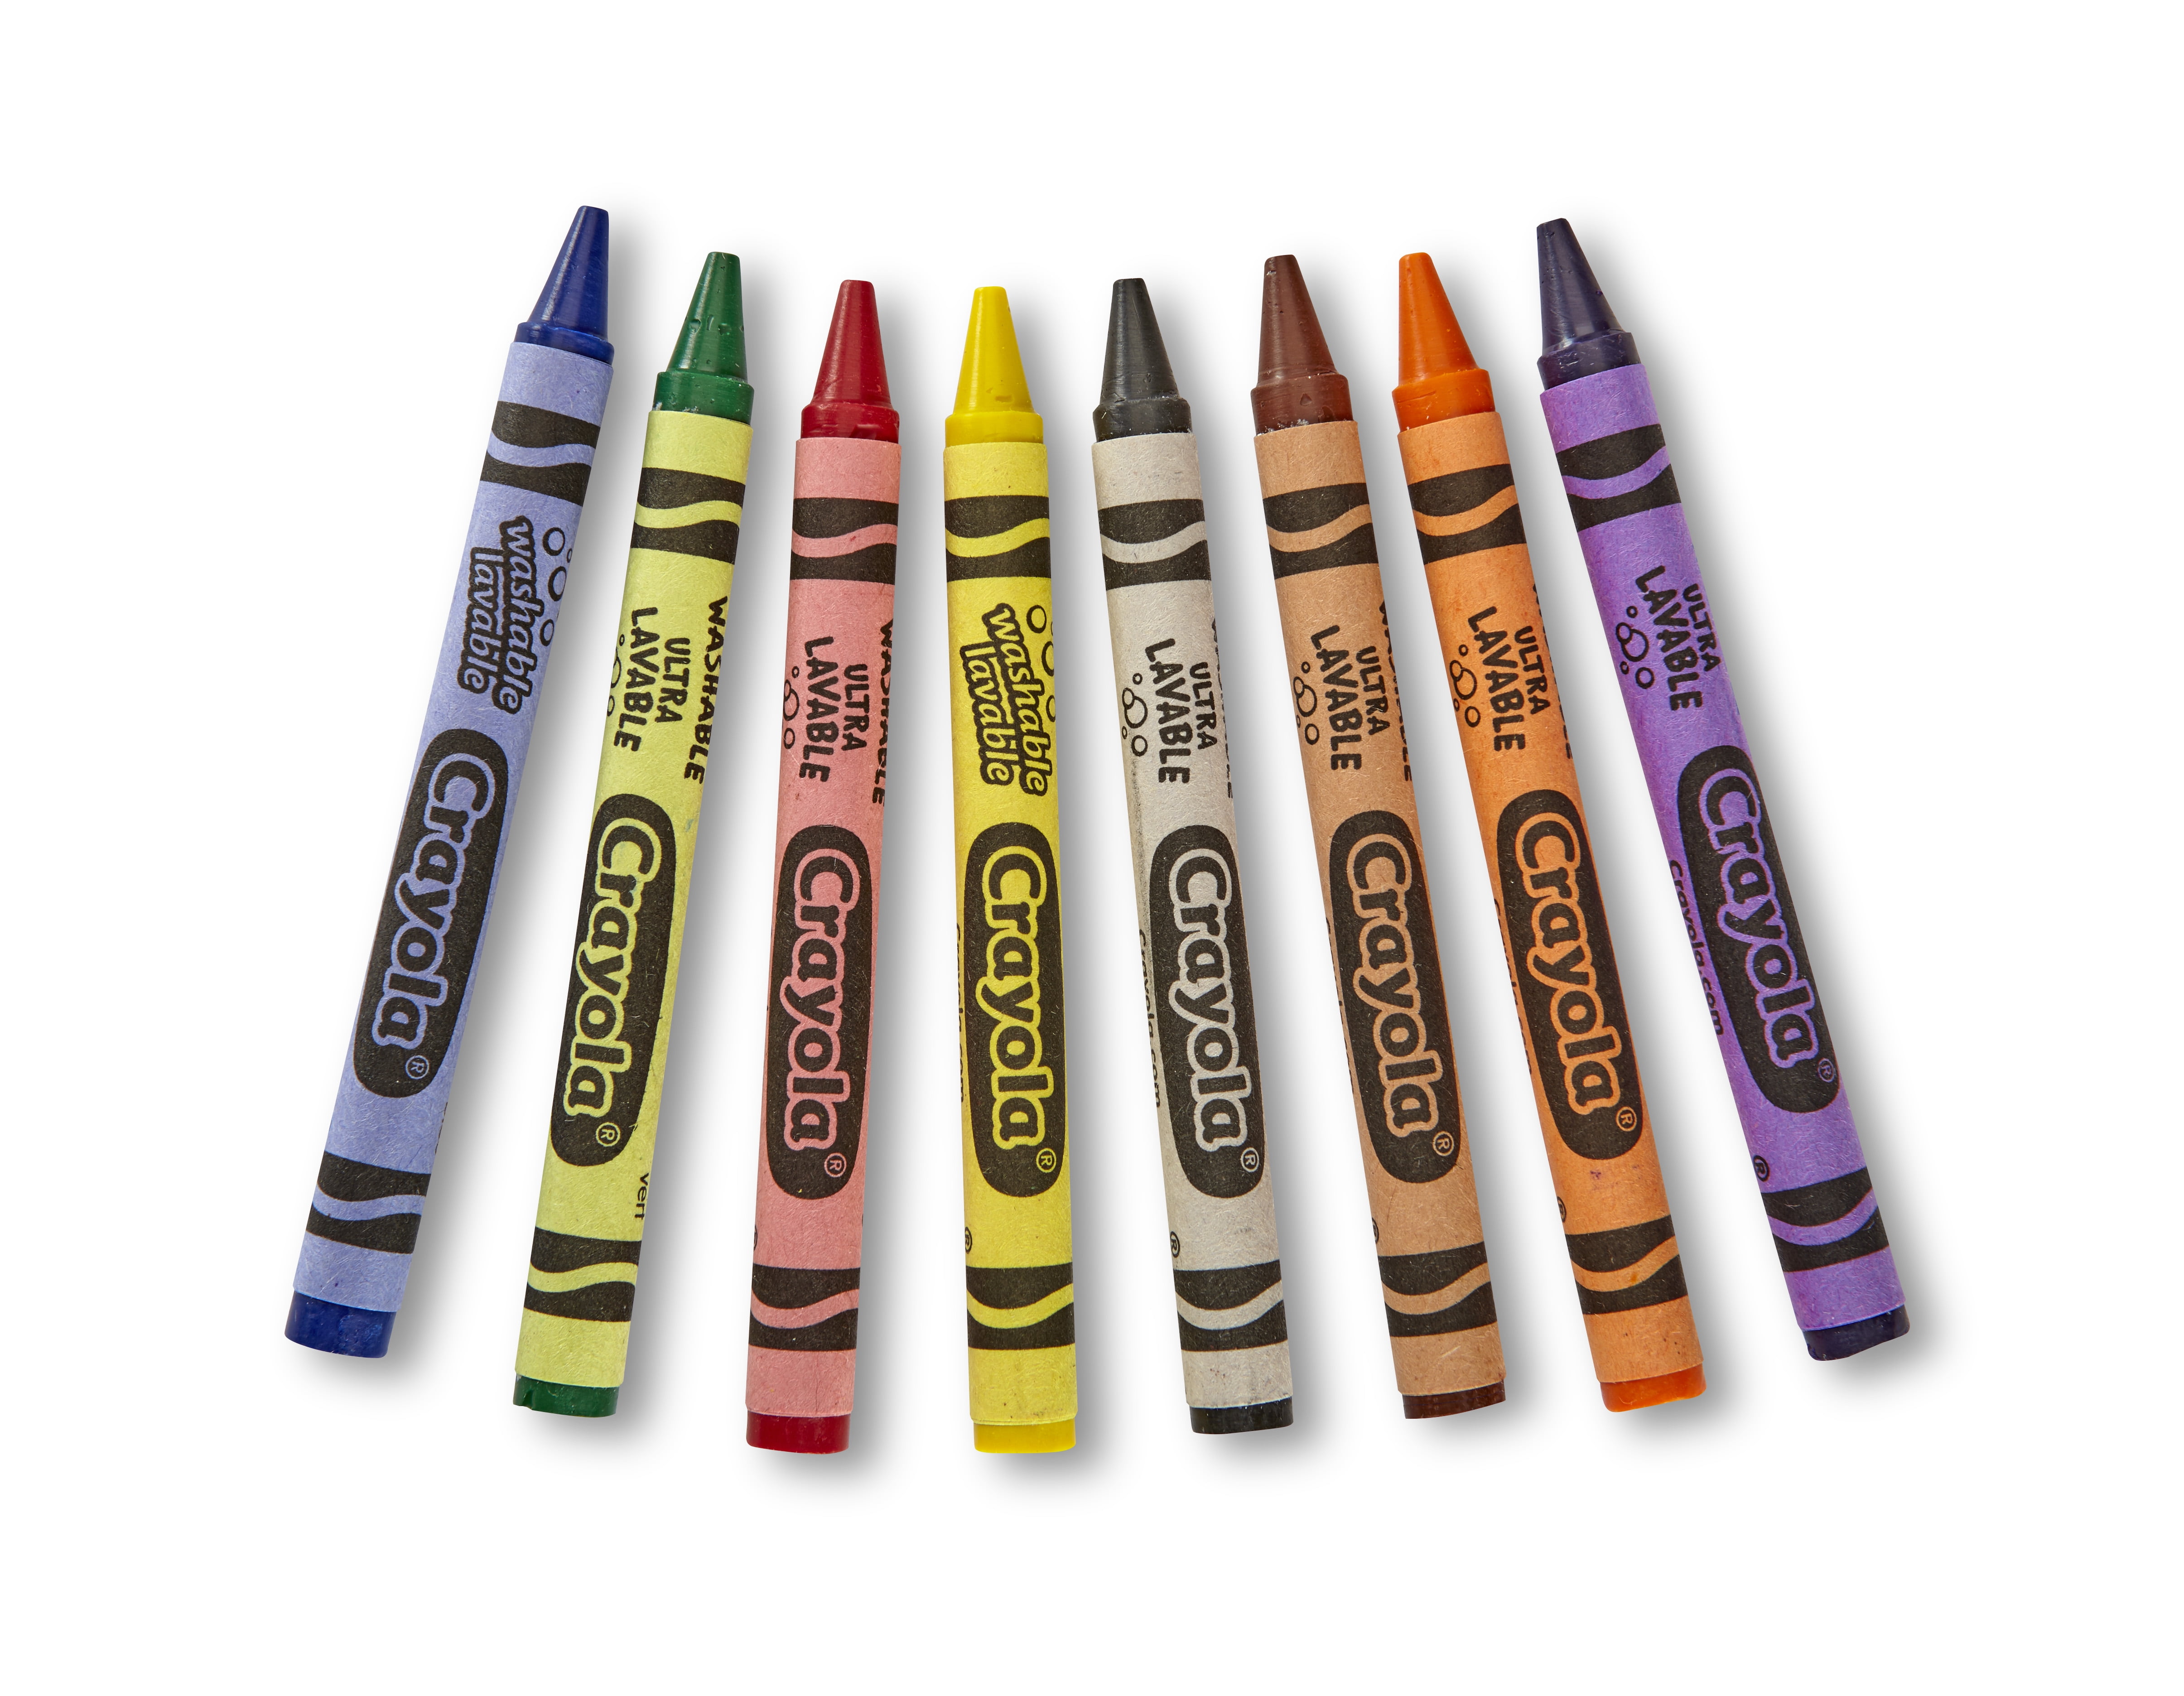 Crayola 10 & 8 Pack Washable Colored Markers With Glider & Colored Crayons  Tin